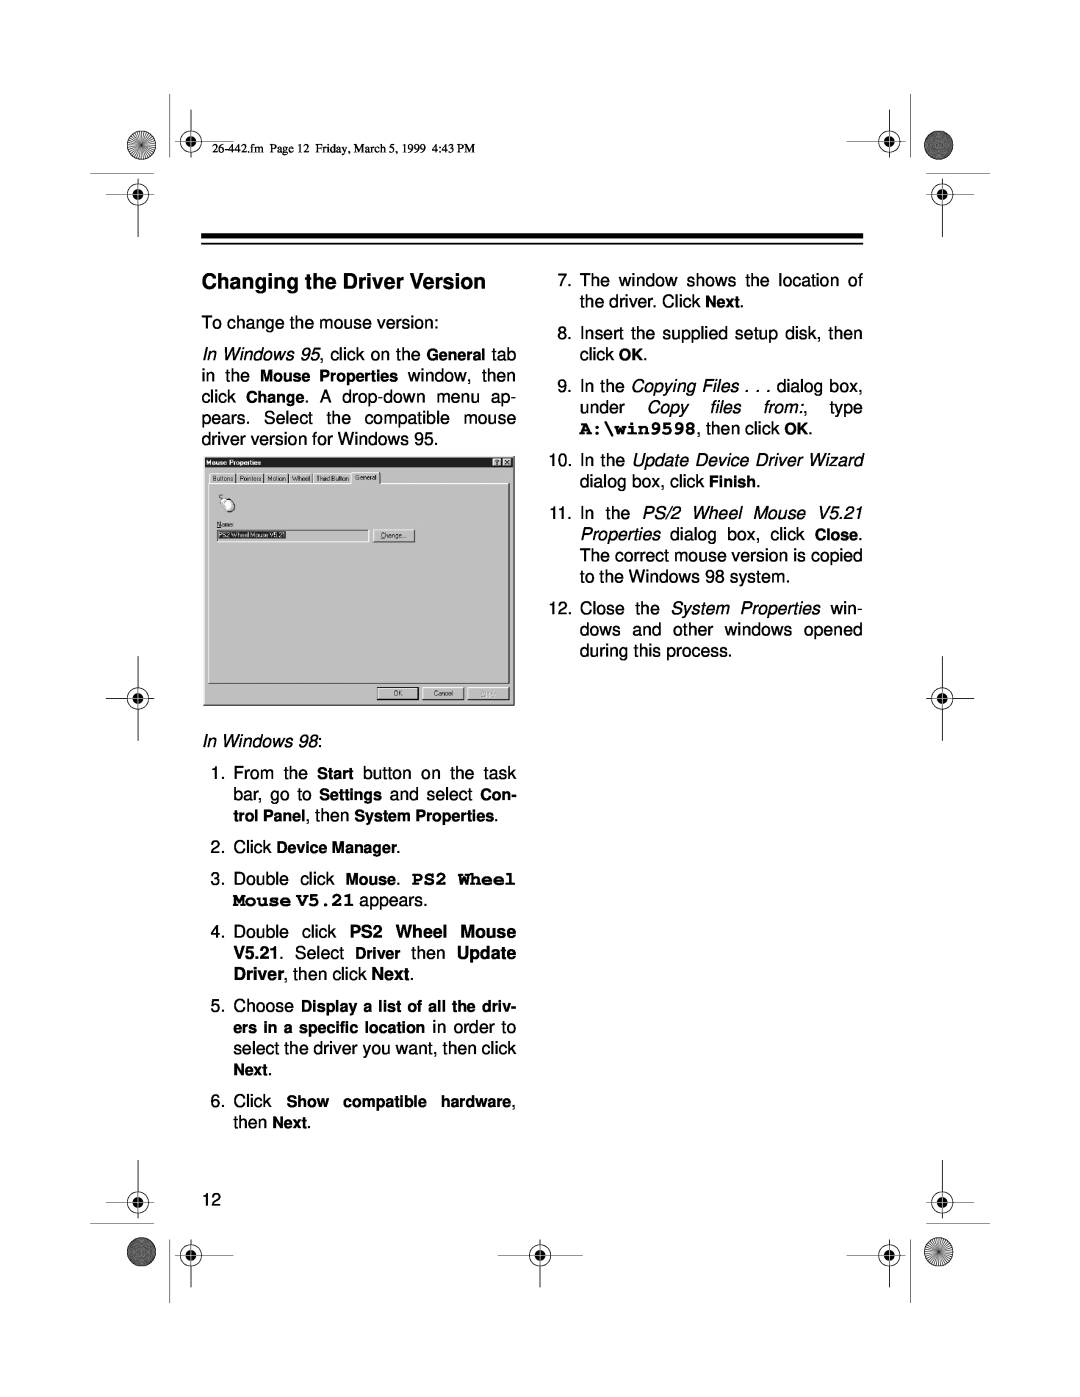 Radio Shack 26-442 owner manual Changing the Driver Version 